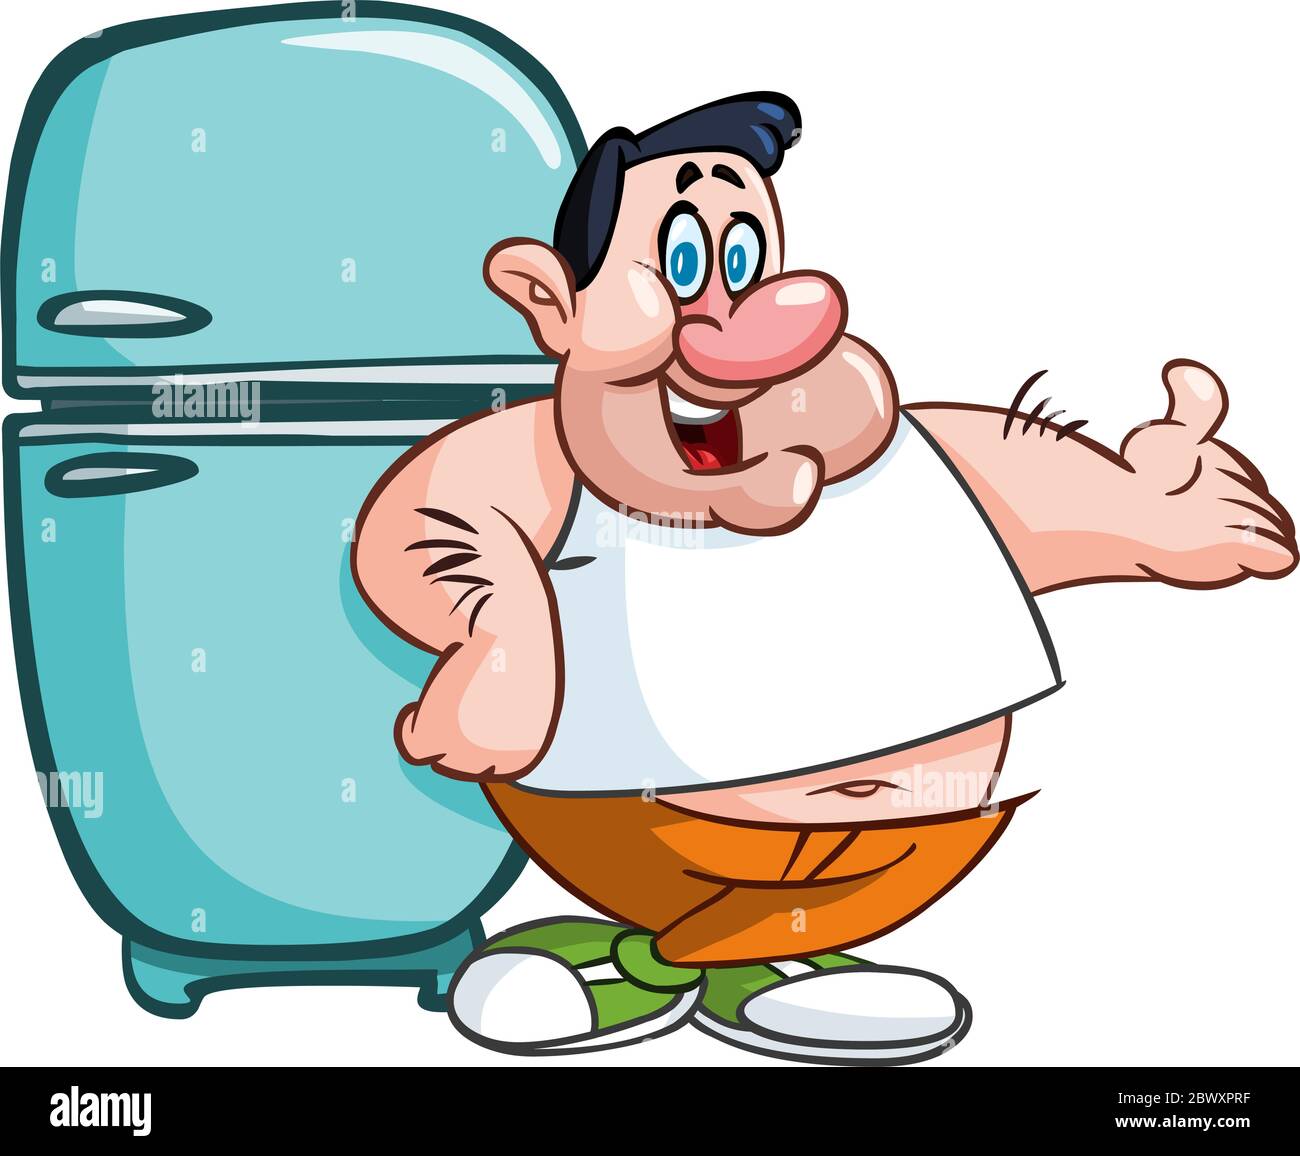 Fat man leaning on a fridge and presenting with his hand Stock Vector